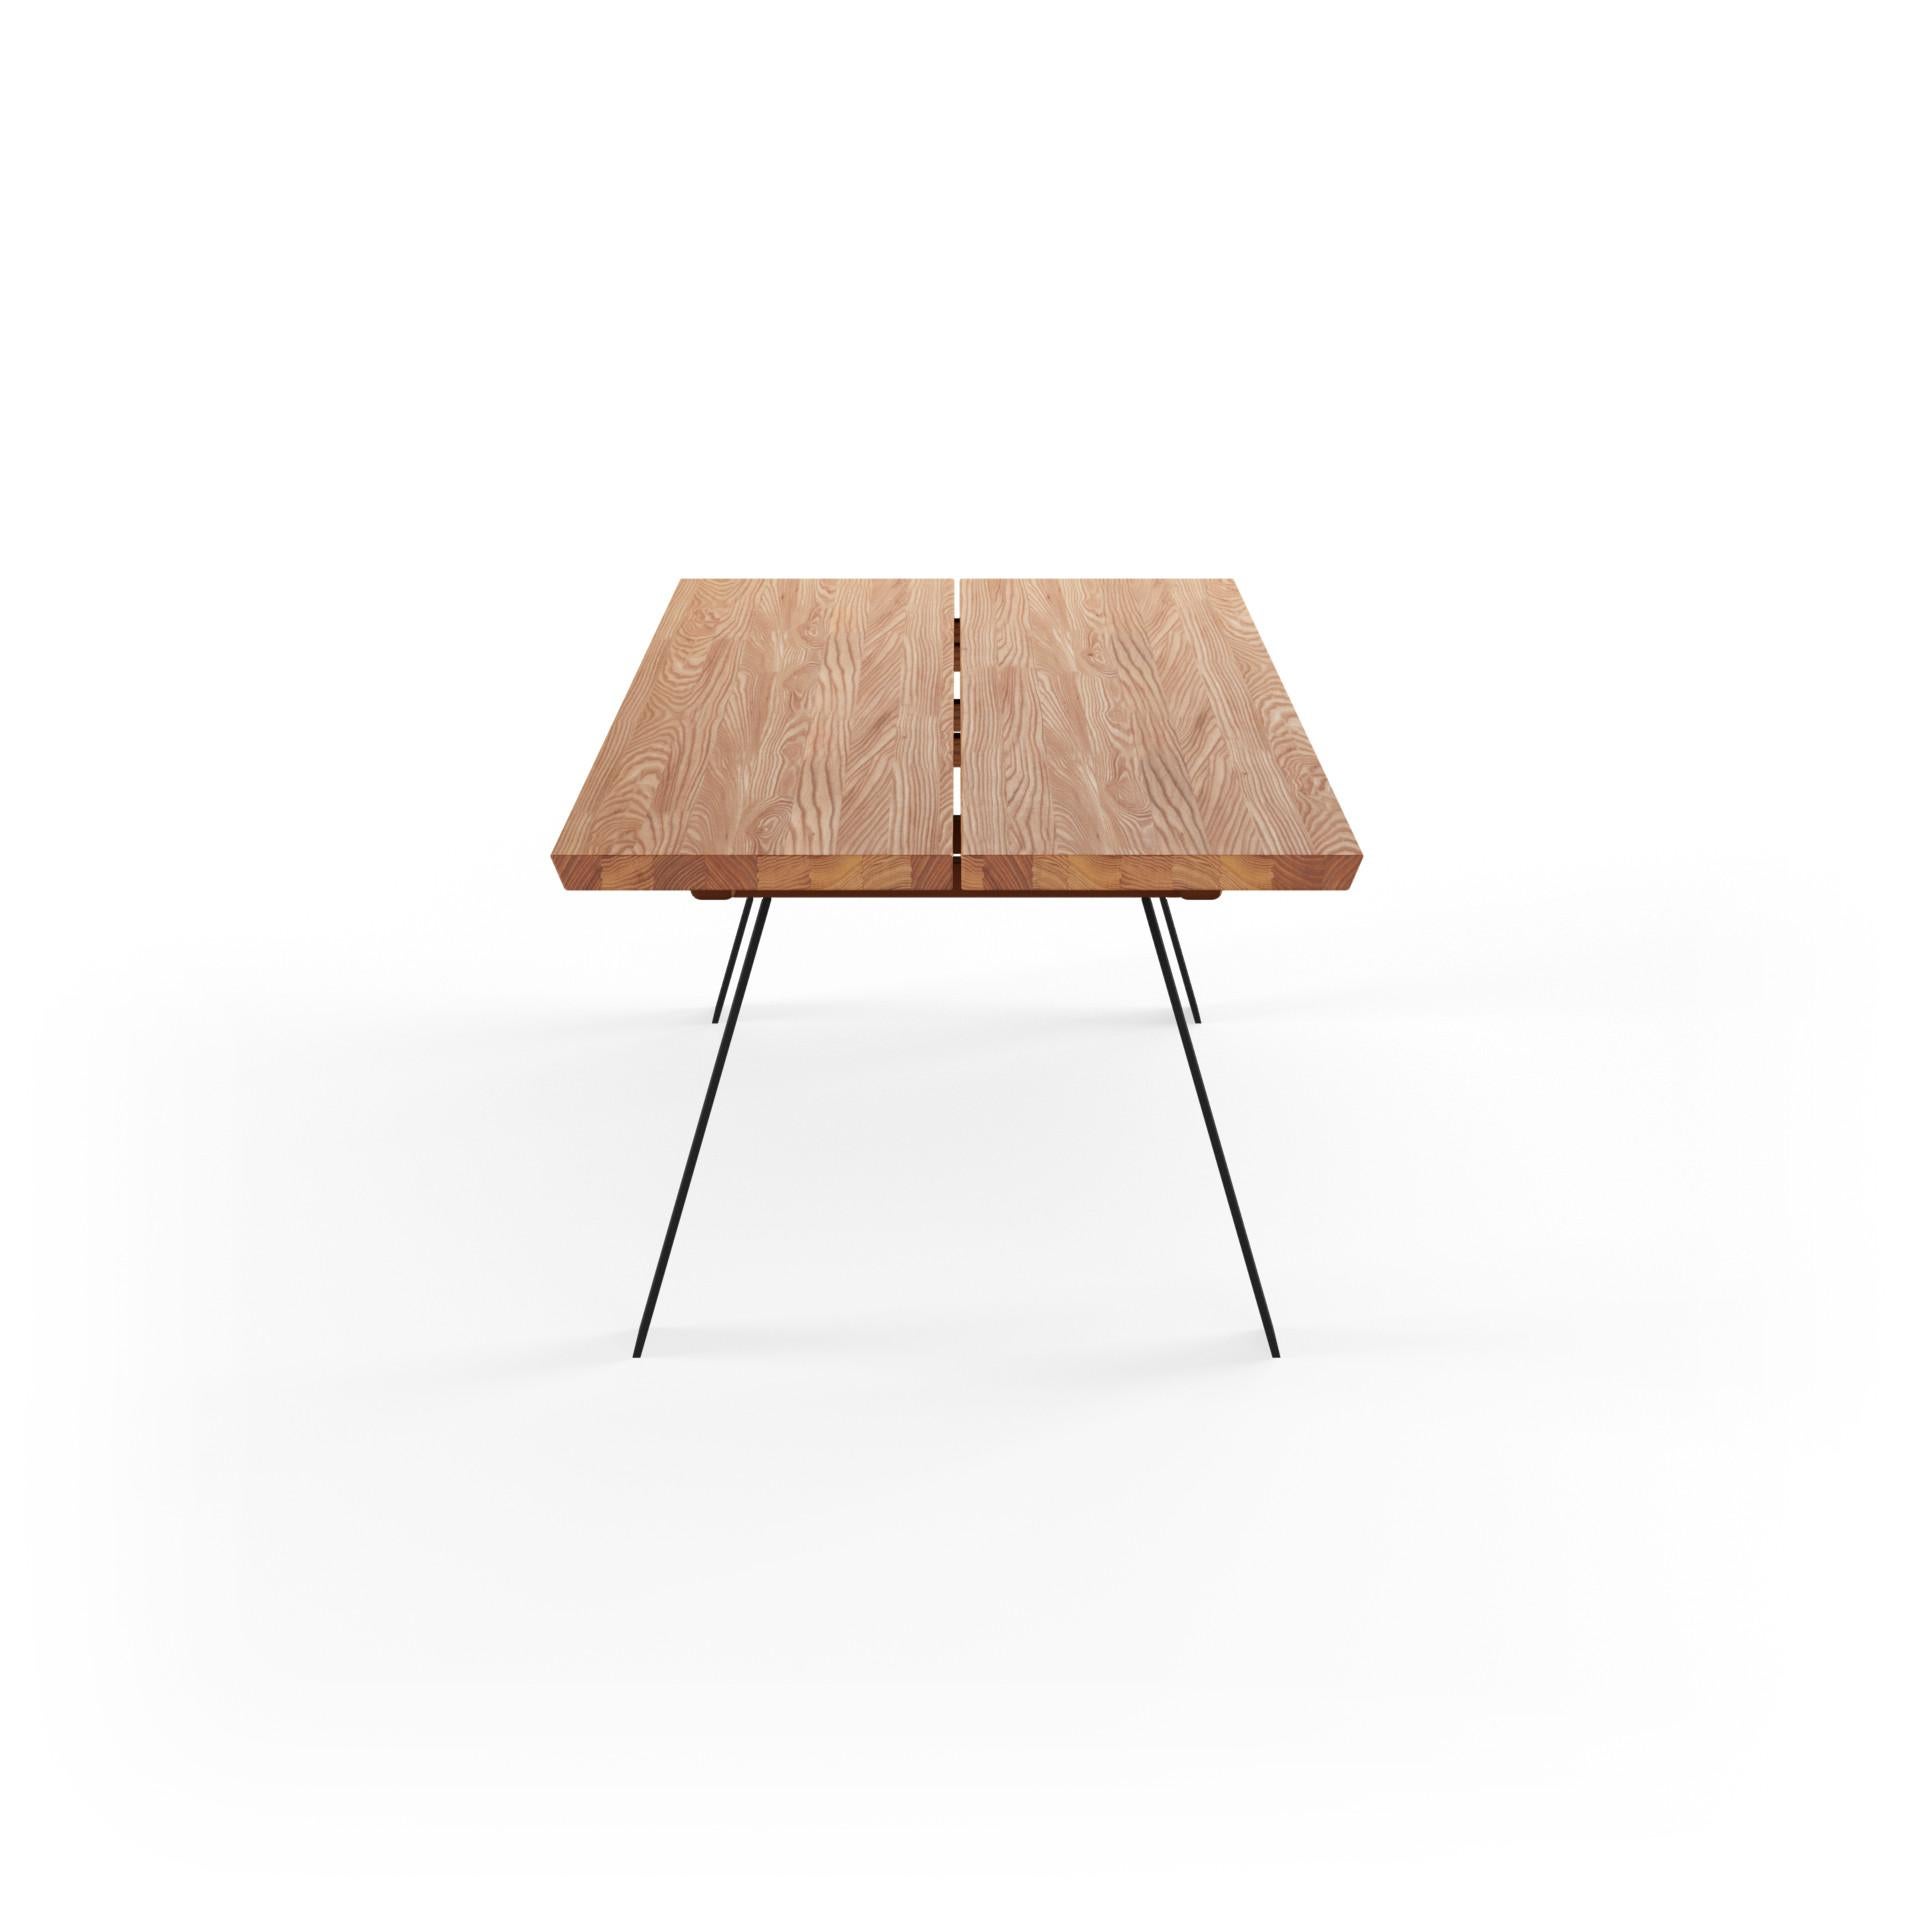 When designing the Plank table our design duo Nissen & Gehl combined the rustic look from solid wood planks with an elegant finish. The solid Plank table is made in the woods ash, oak, elm and walnut, and the table is extendable with up to two